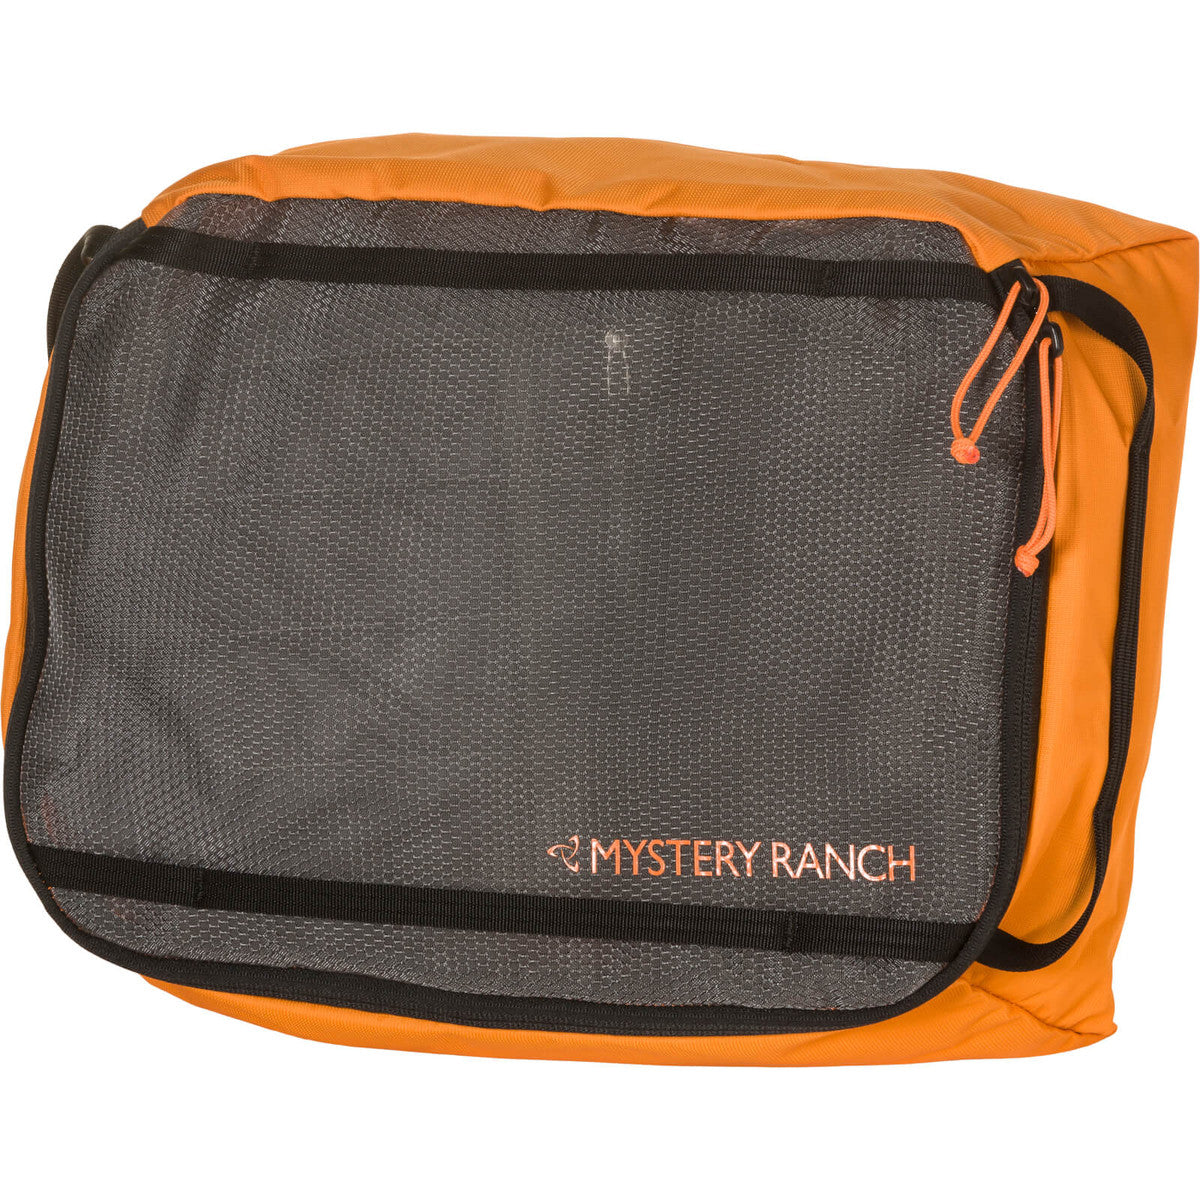 Mystery Ranch Zoid Cube - L / Hunter Orange - Mansfield Hunting & Fishing - Products to prepare for Corona Virus